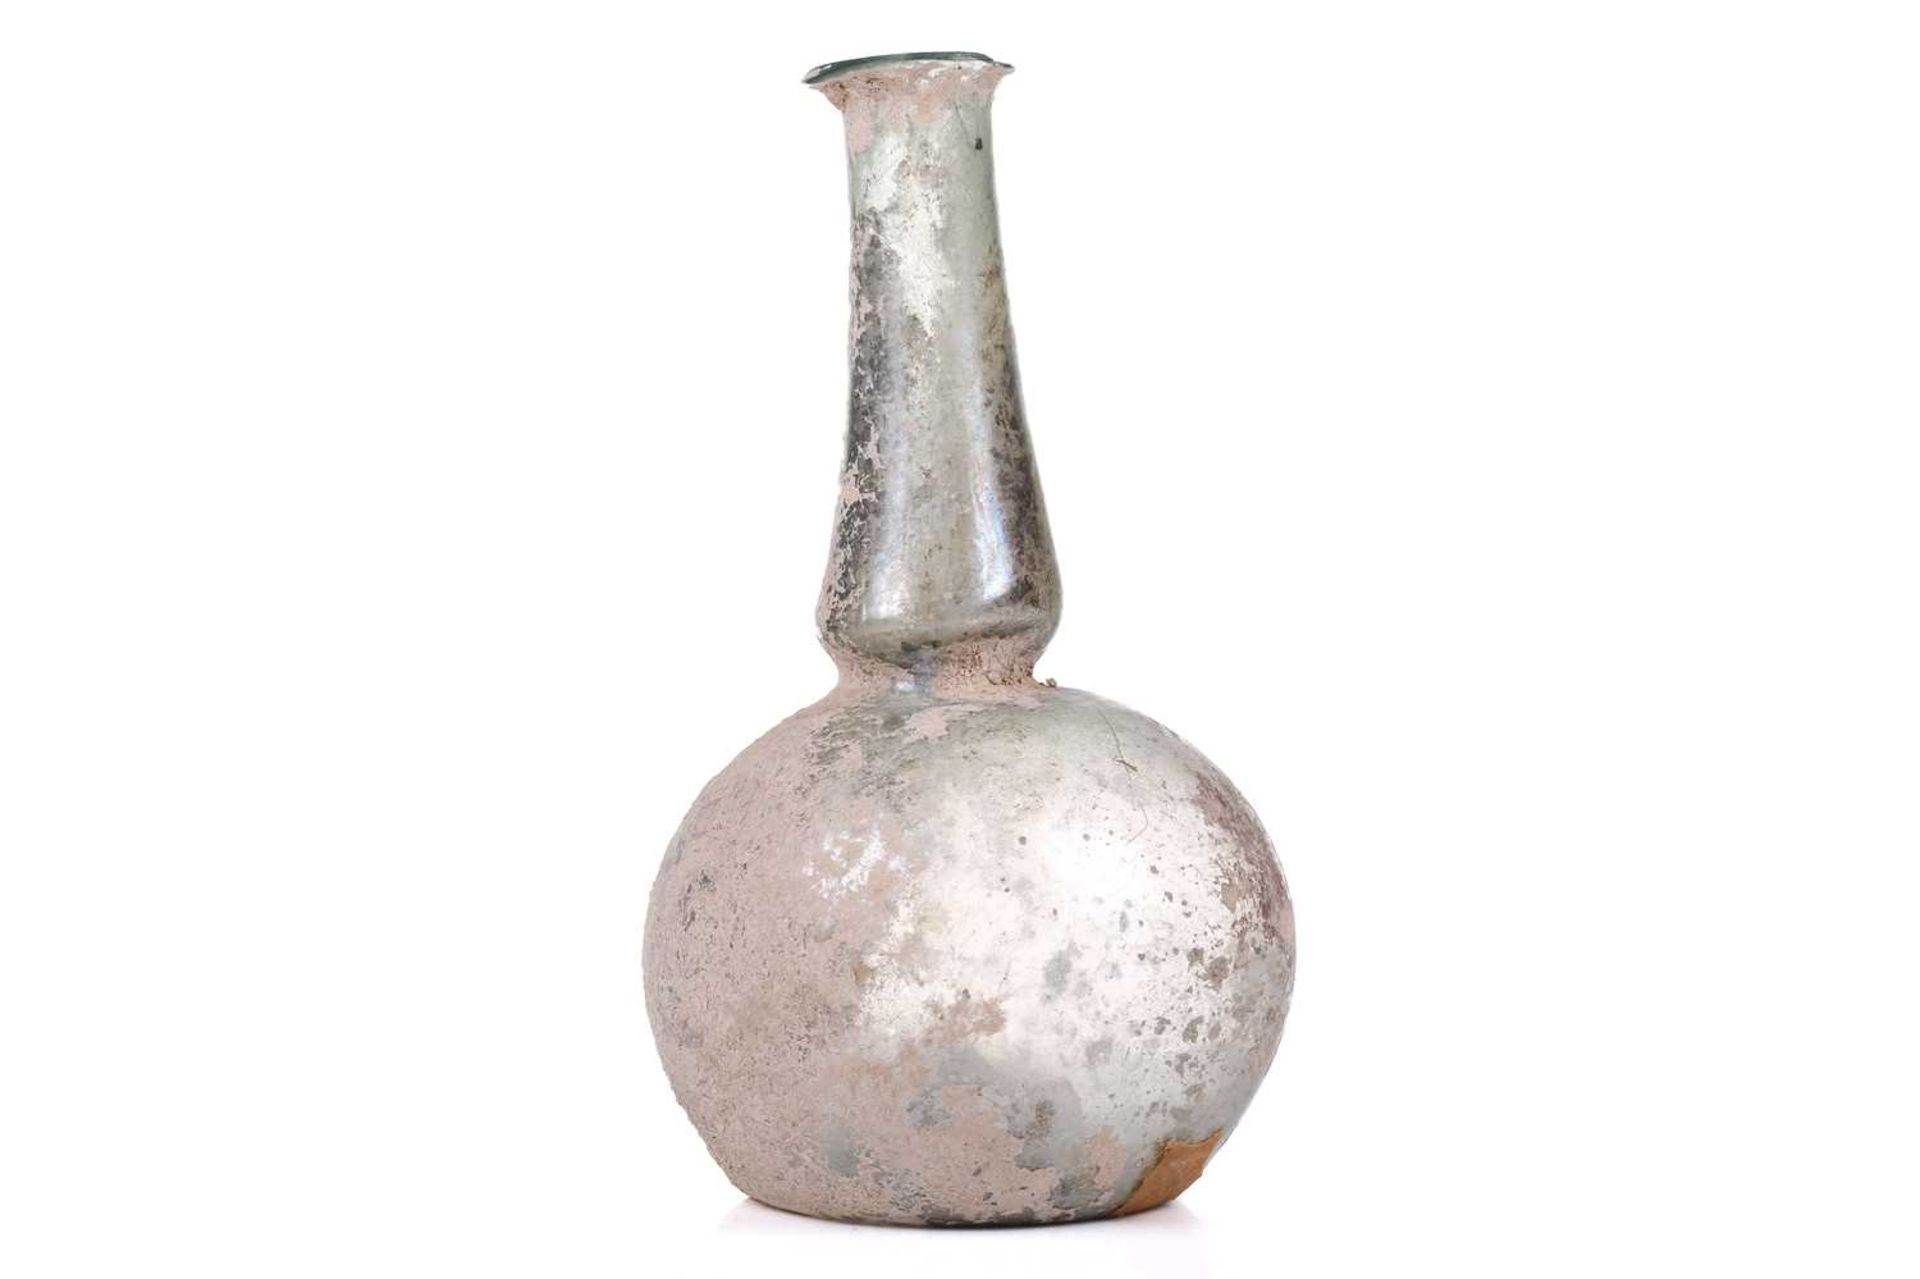 A Roman glass bulbous flask with everted rim, signs of oxidation and encrusted soil to the - Image 2 of 6